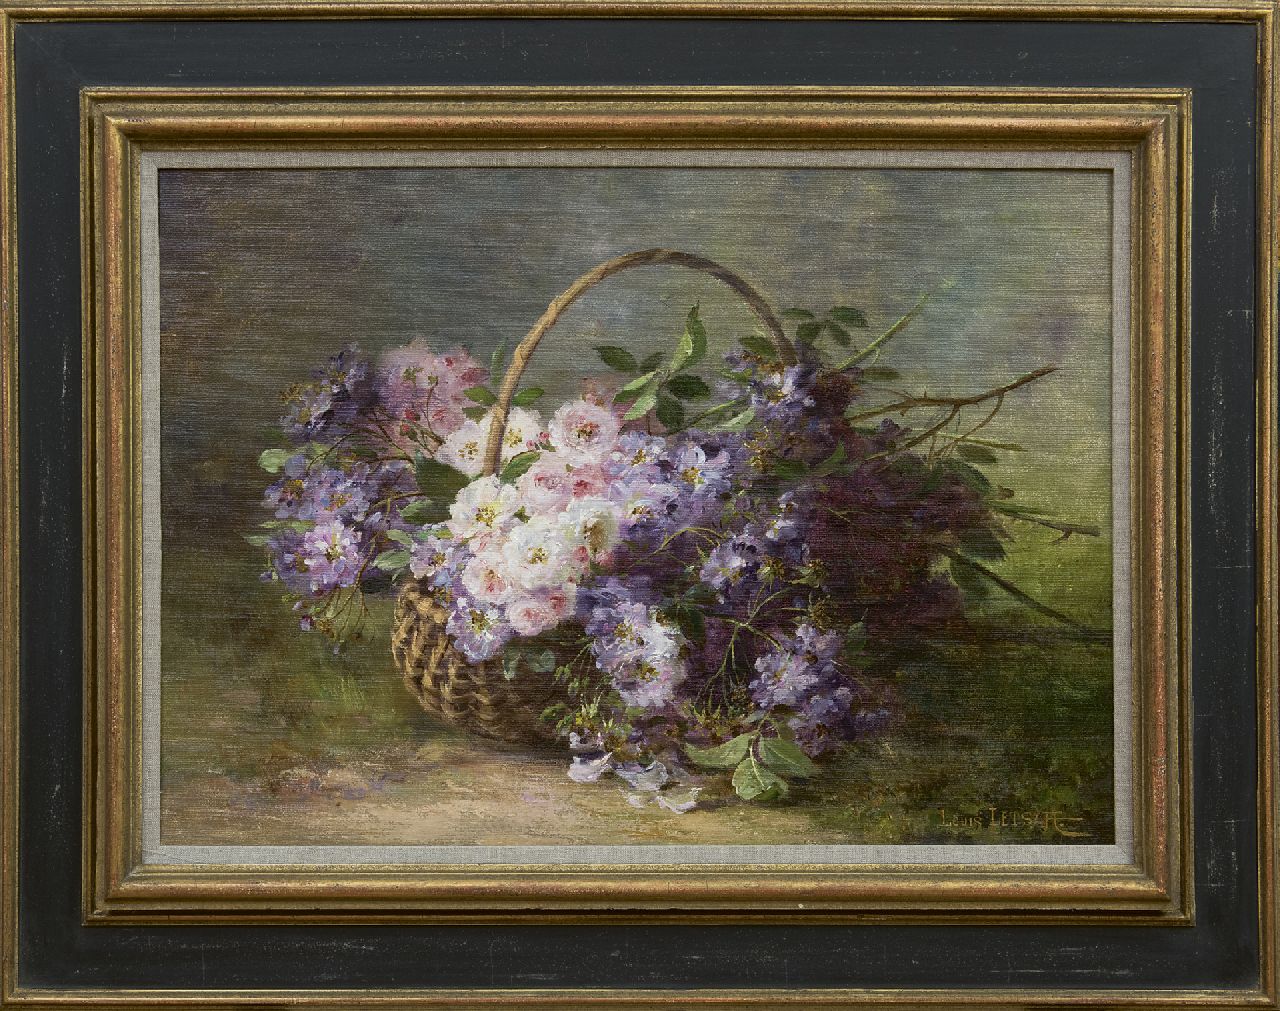 Letsch L.A.  | Ludwig Andreas 'Louis' Letsch, Roses in a basket, oil on canvas 46.5 x 66.3 cm, signed l.r.